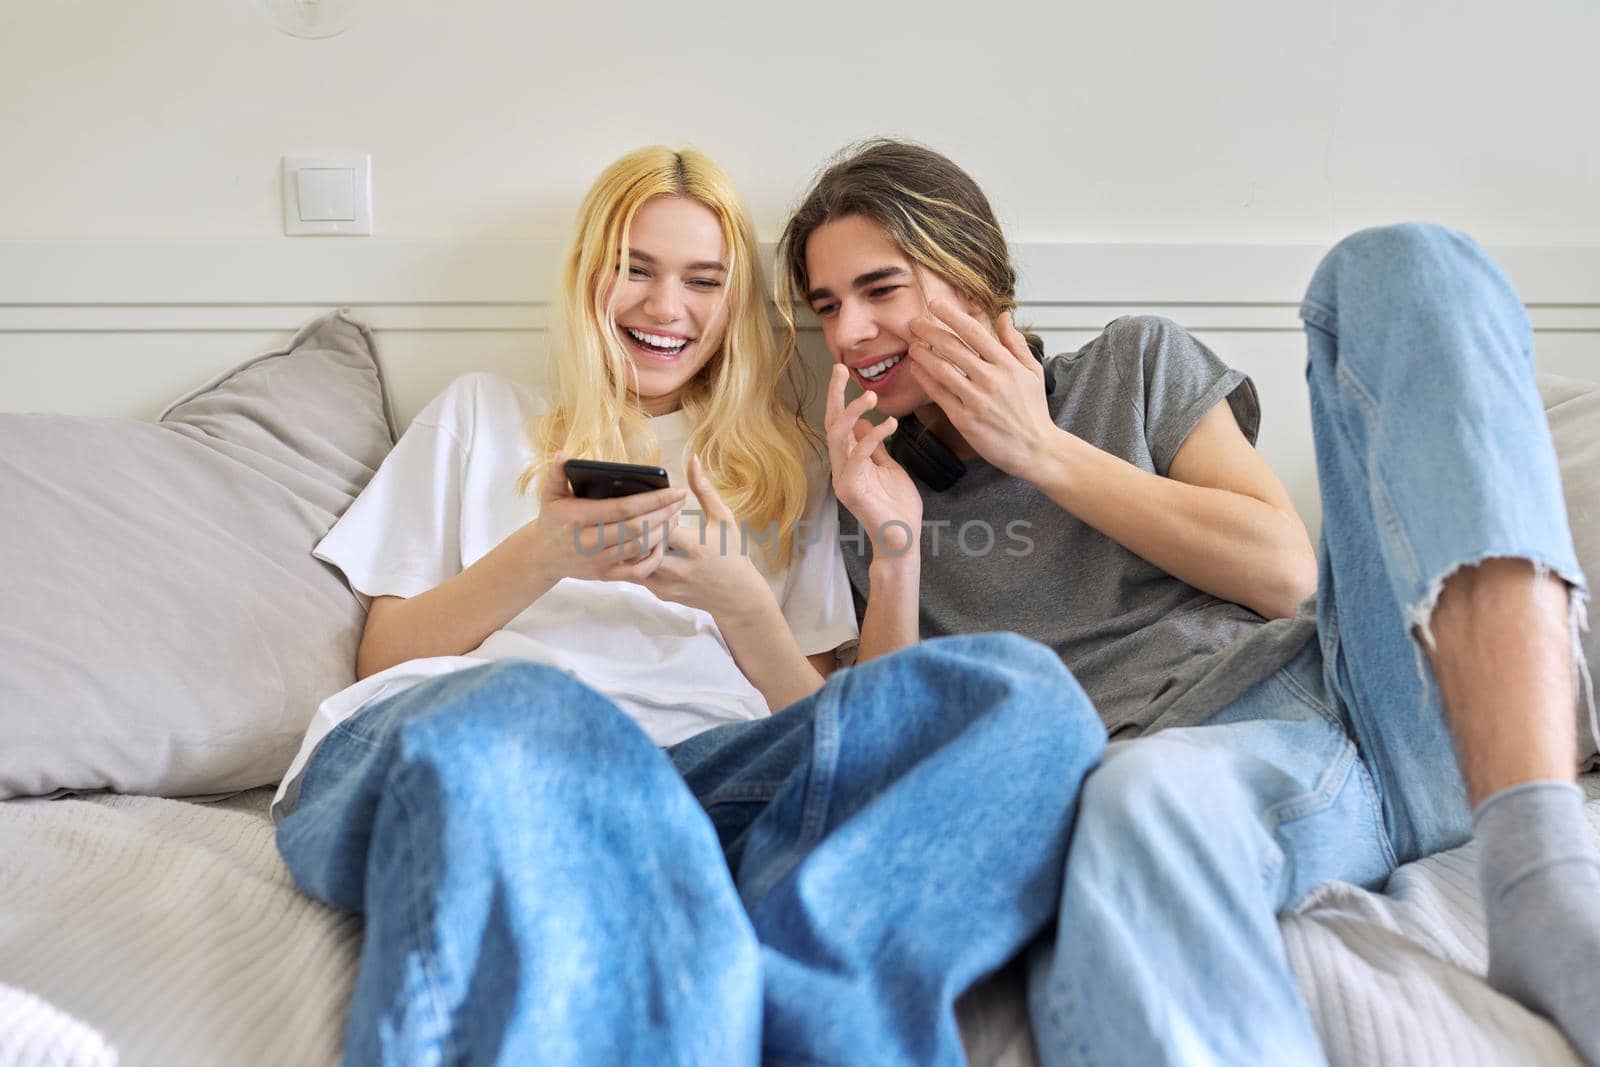 Couple of cheerful emotional teenagers friends having fun together, sitting on couch looking into smartphone. Adolescents male and female 15, 16 years old, technology, lifestyle, fun, friendship